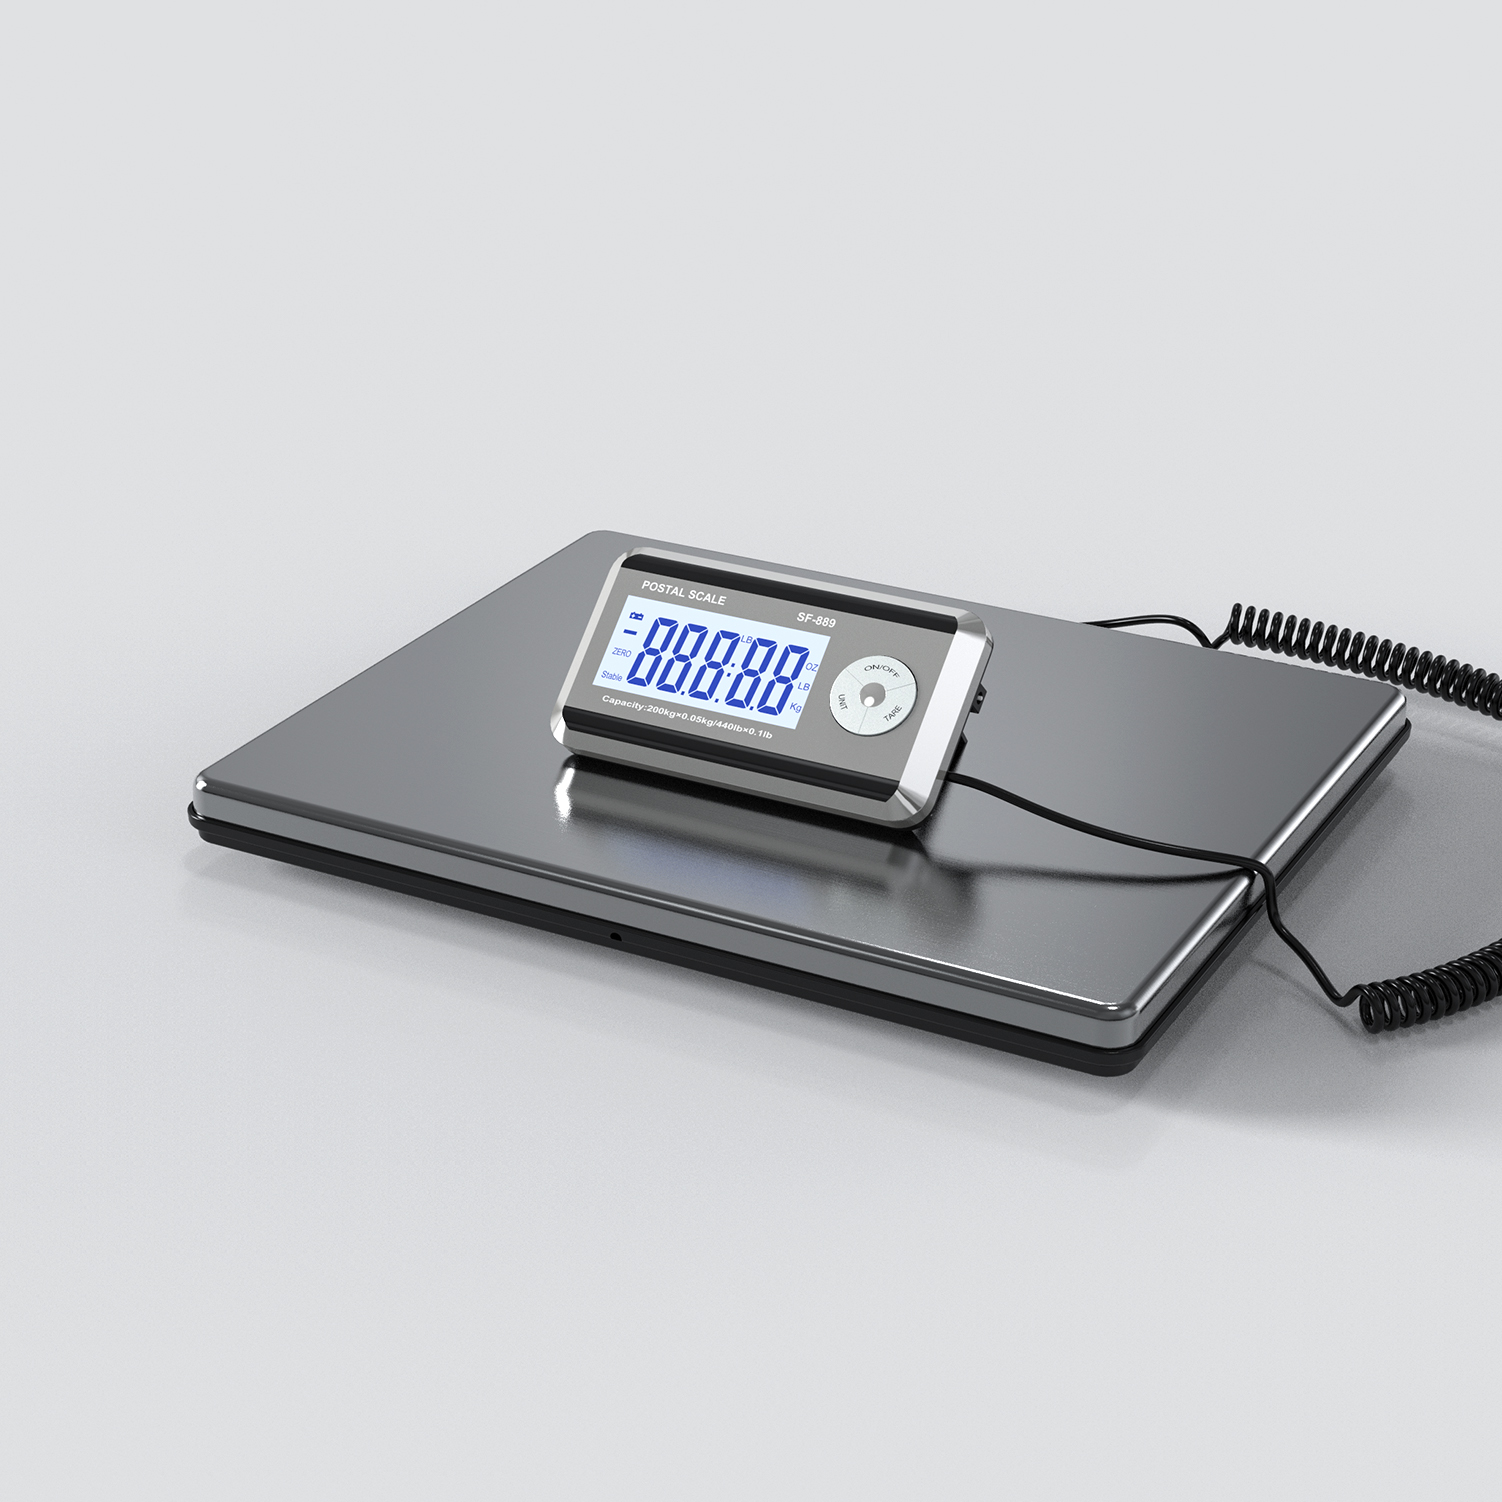 SF-889 new fashioned parcel weighing balance scales 200kg